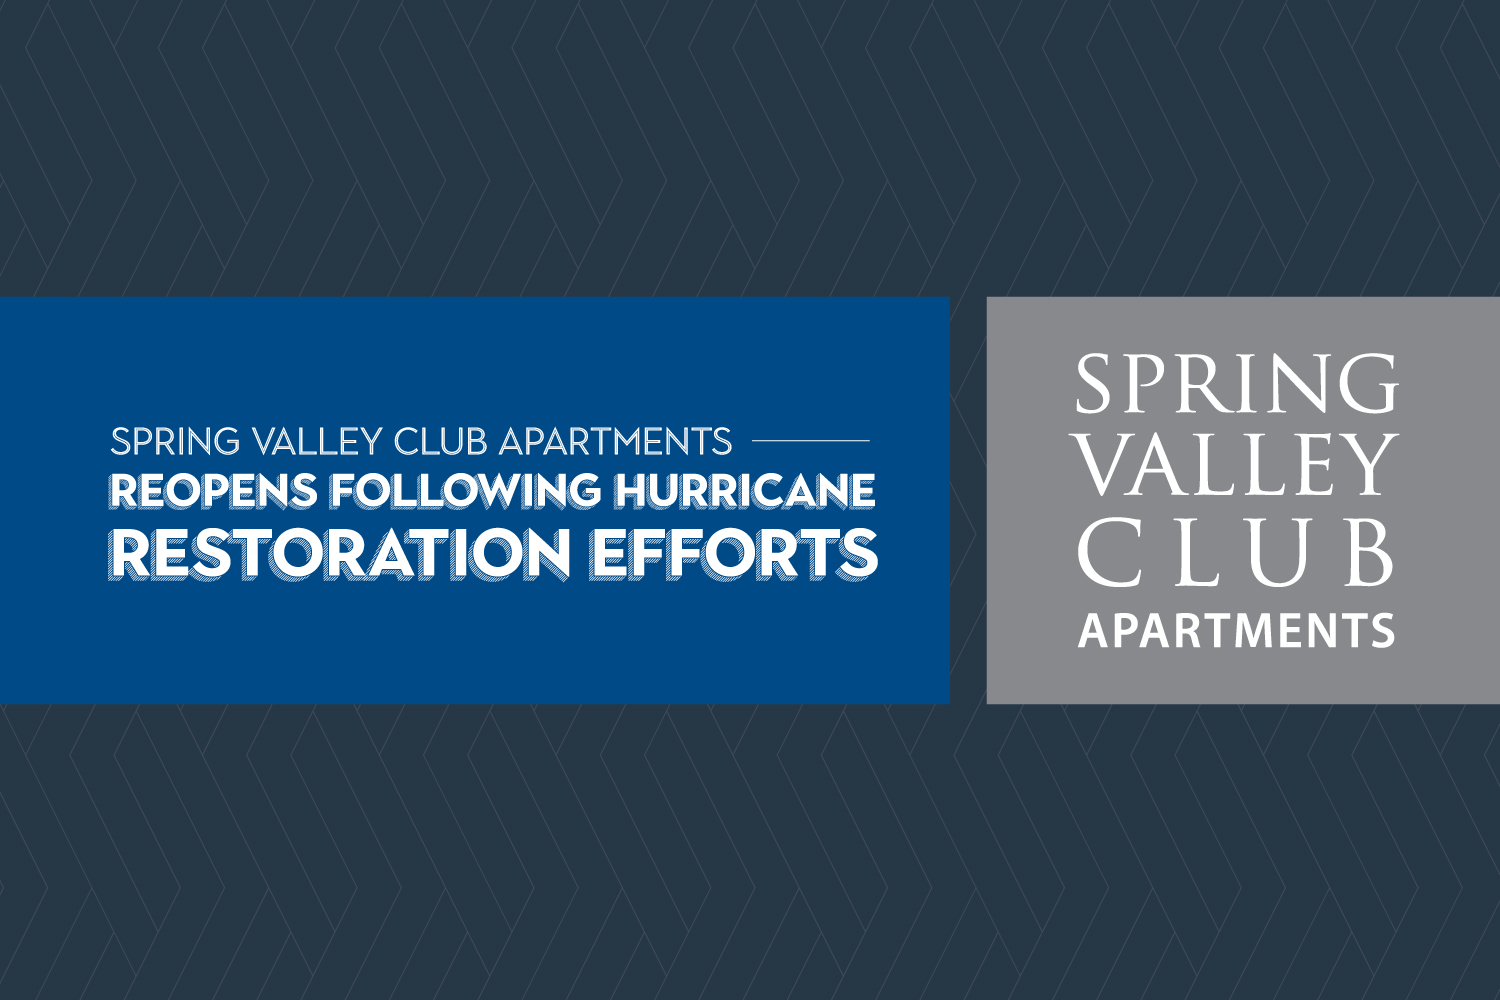 Spring Valley Club Apartments reopens following hurricane restoration efforts